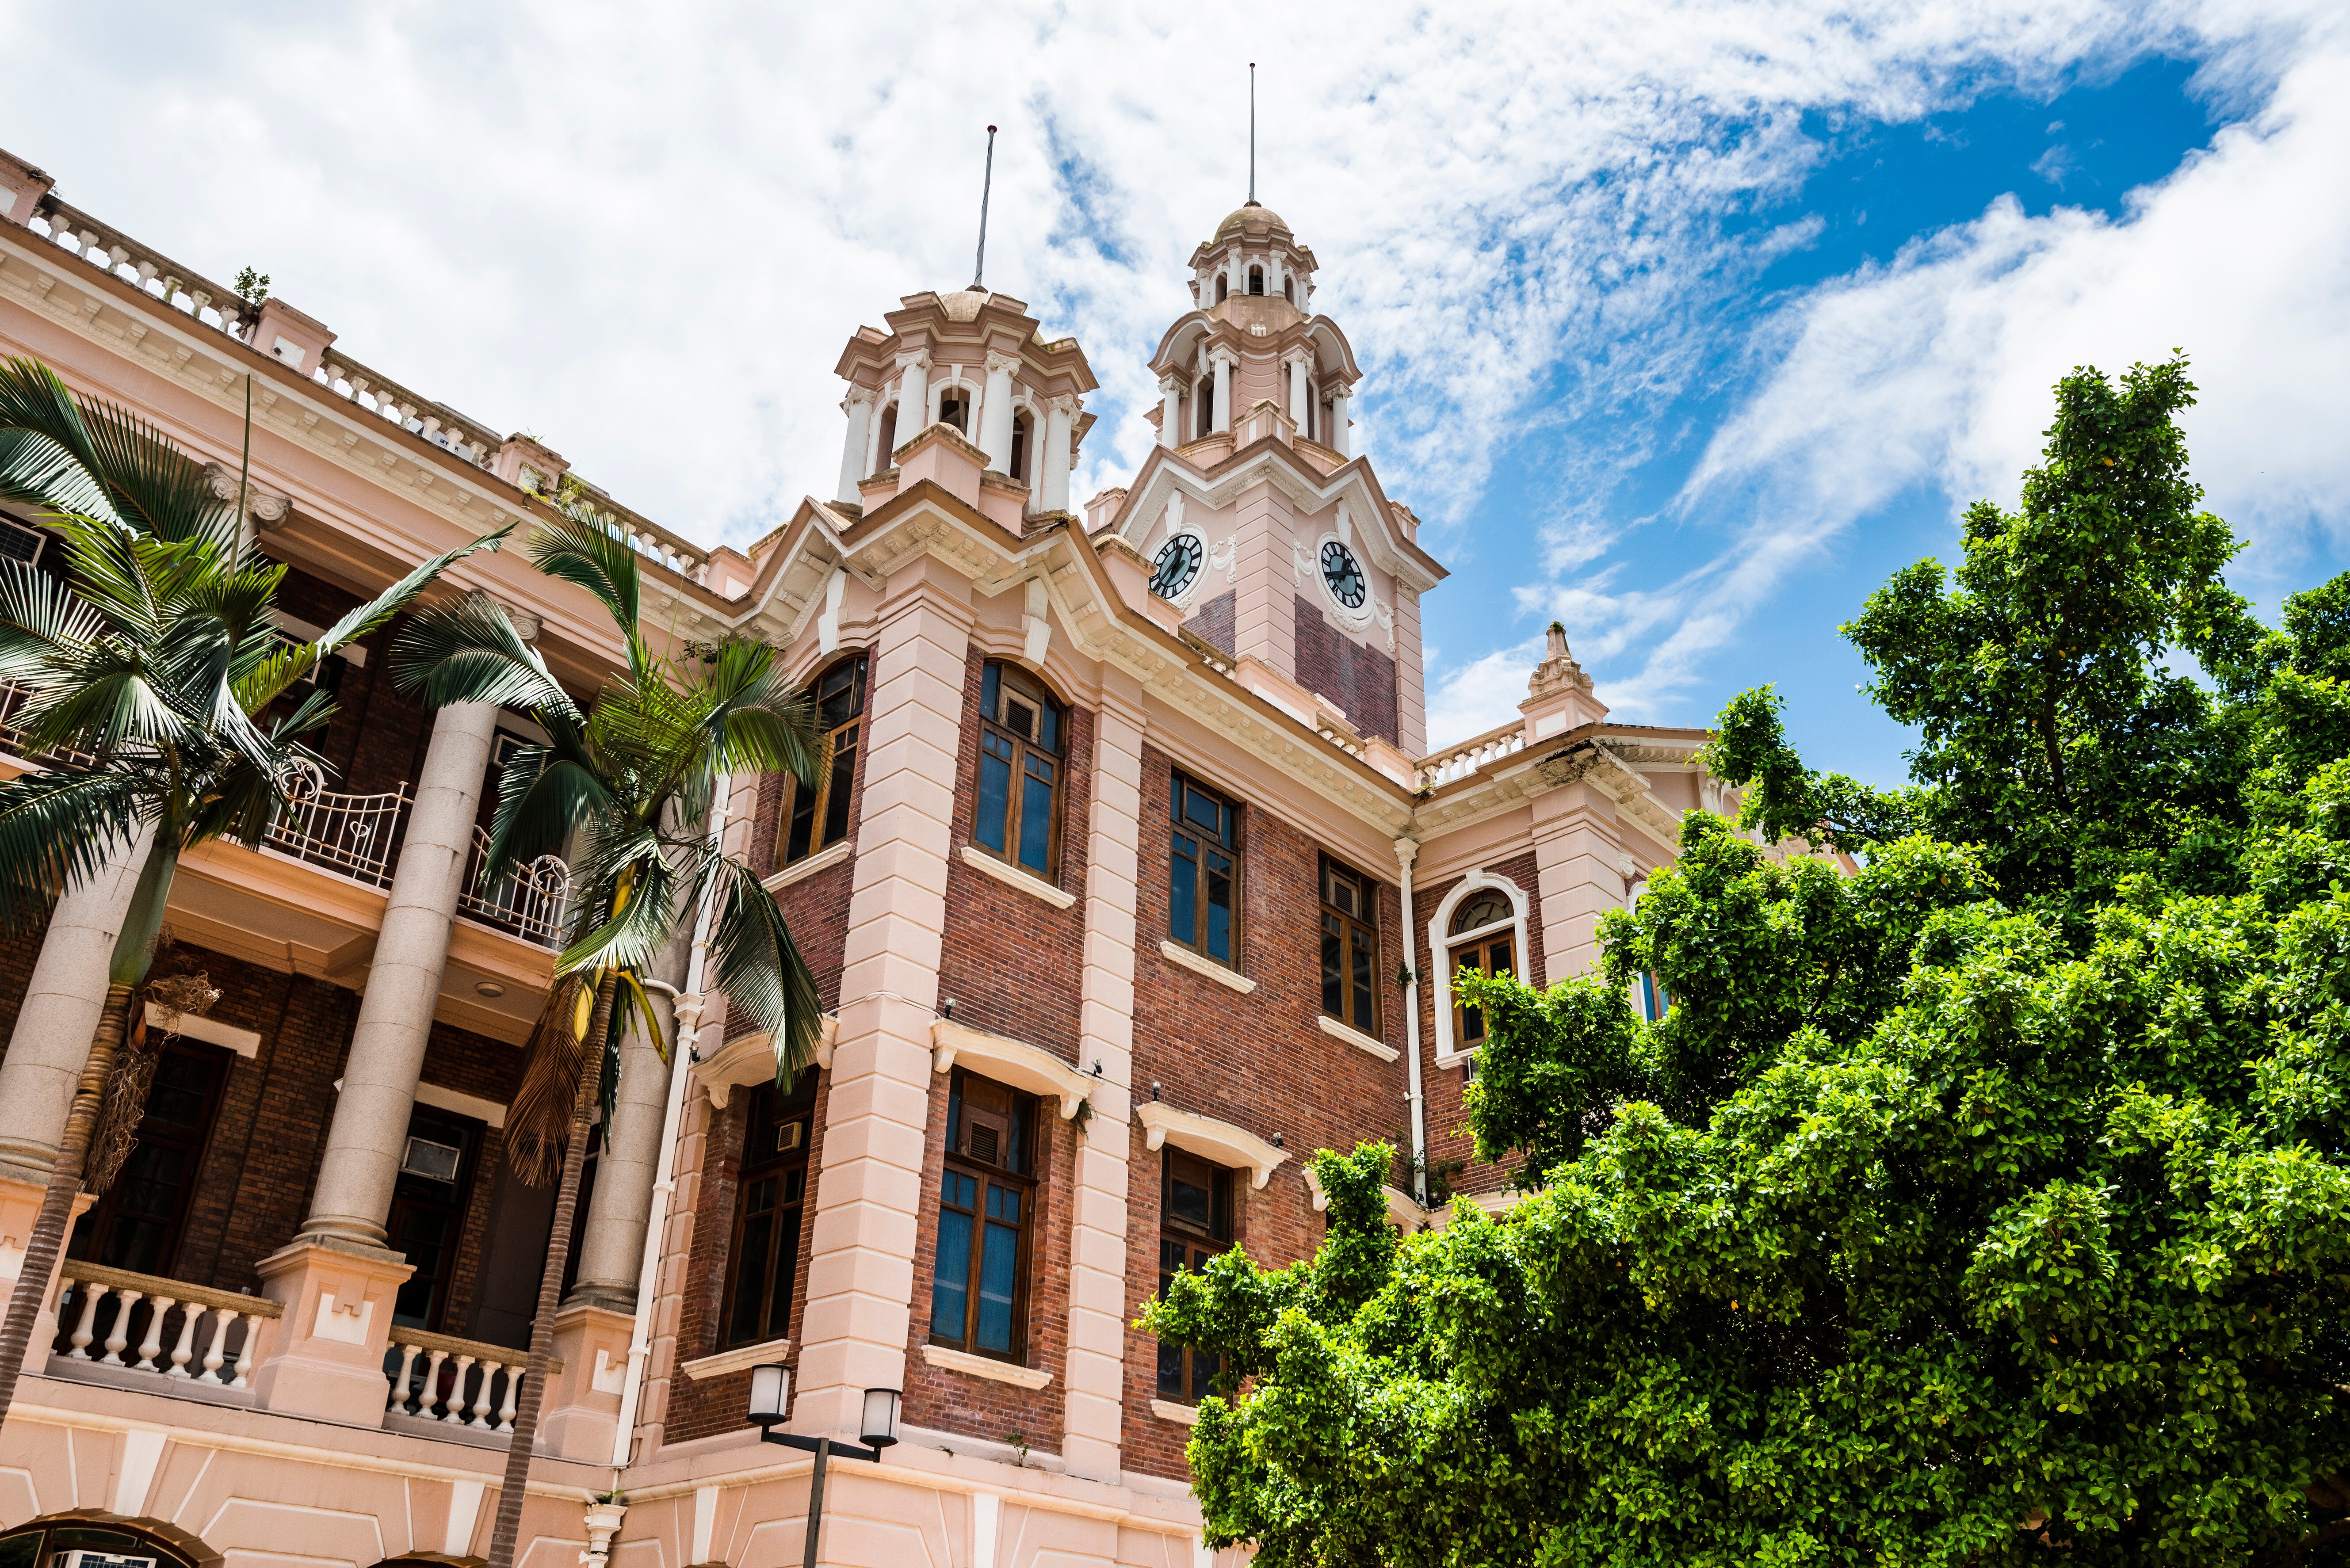 Hong Kong’s oldest university HKU slipped a place in the rankings.